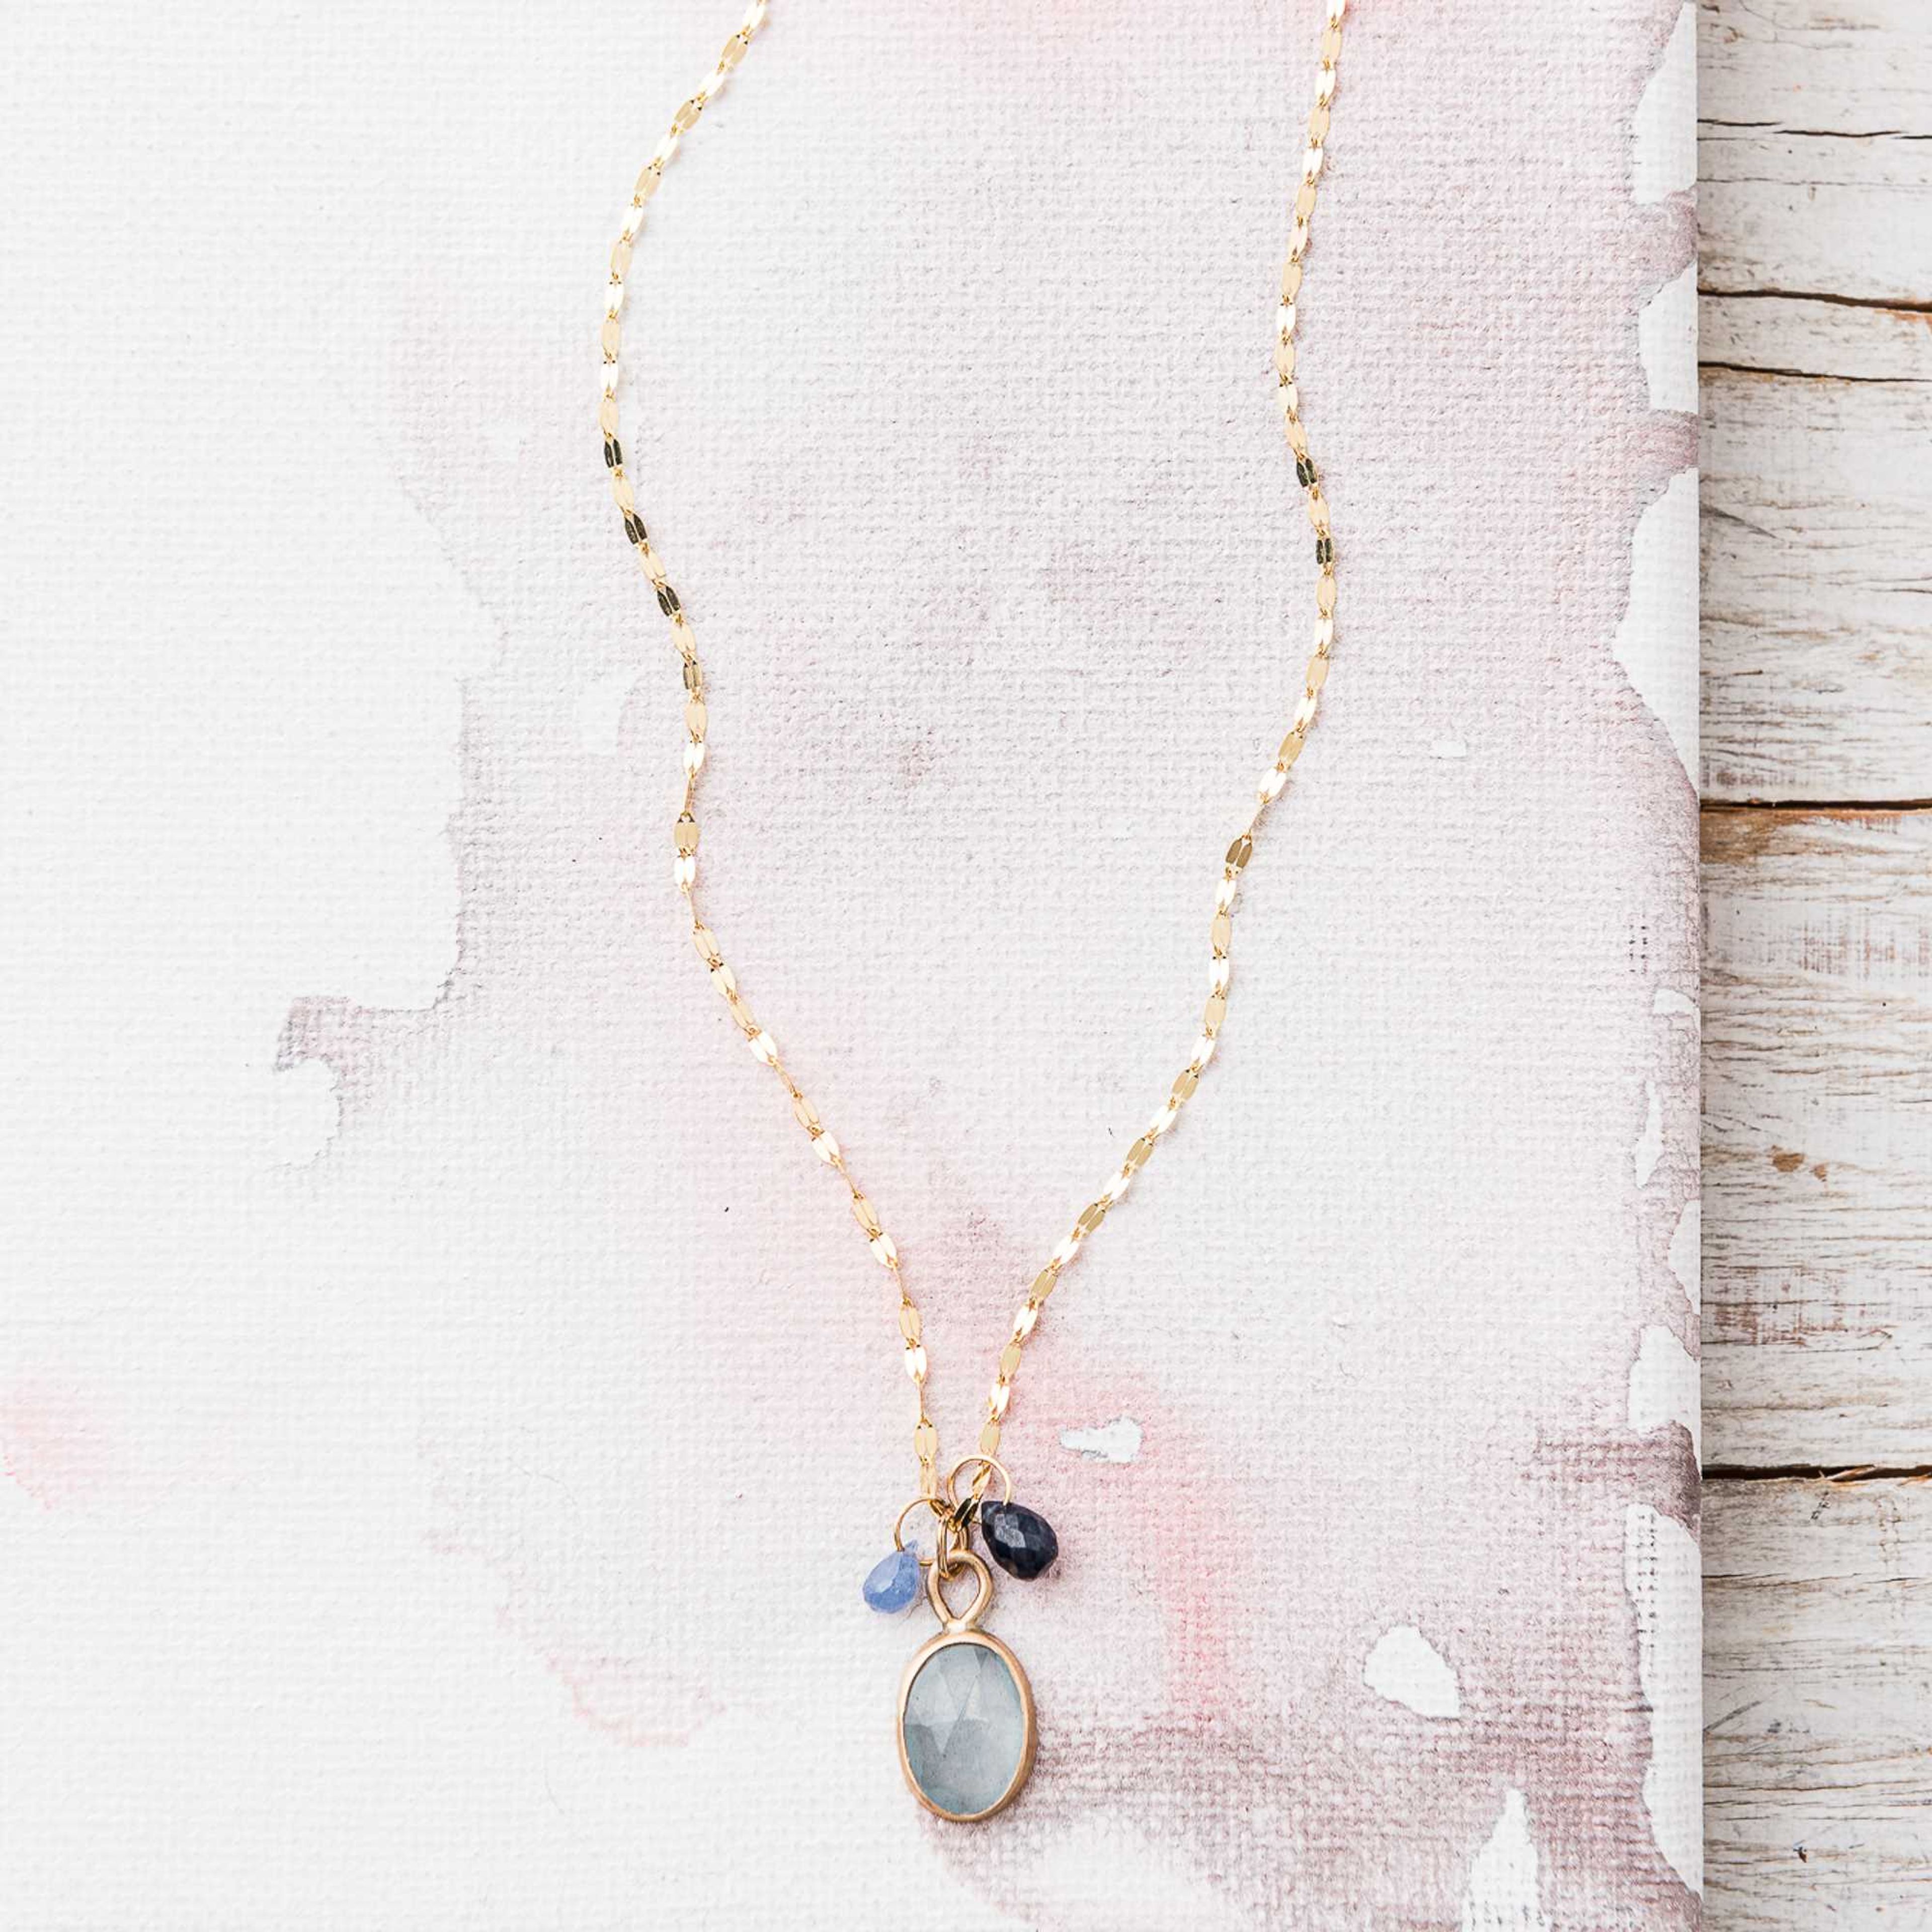 Aquamarine Necklace with Sapphire Charms